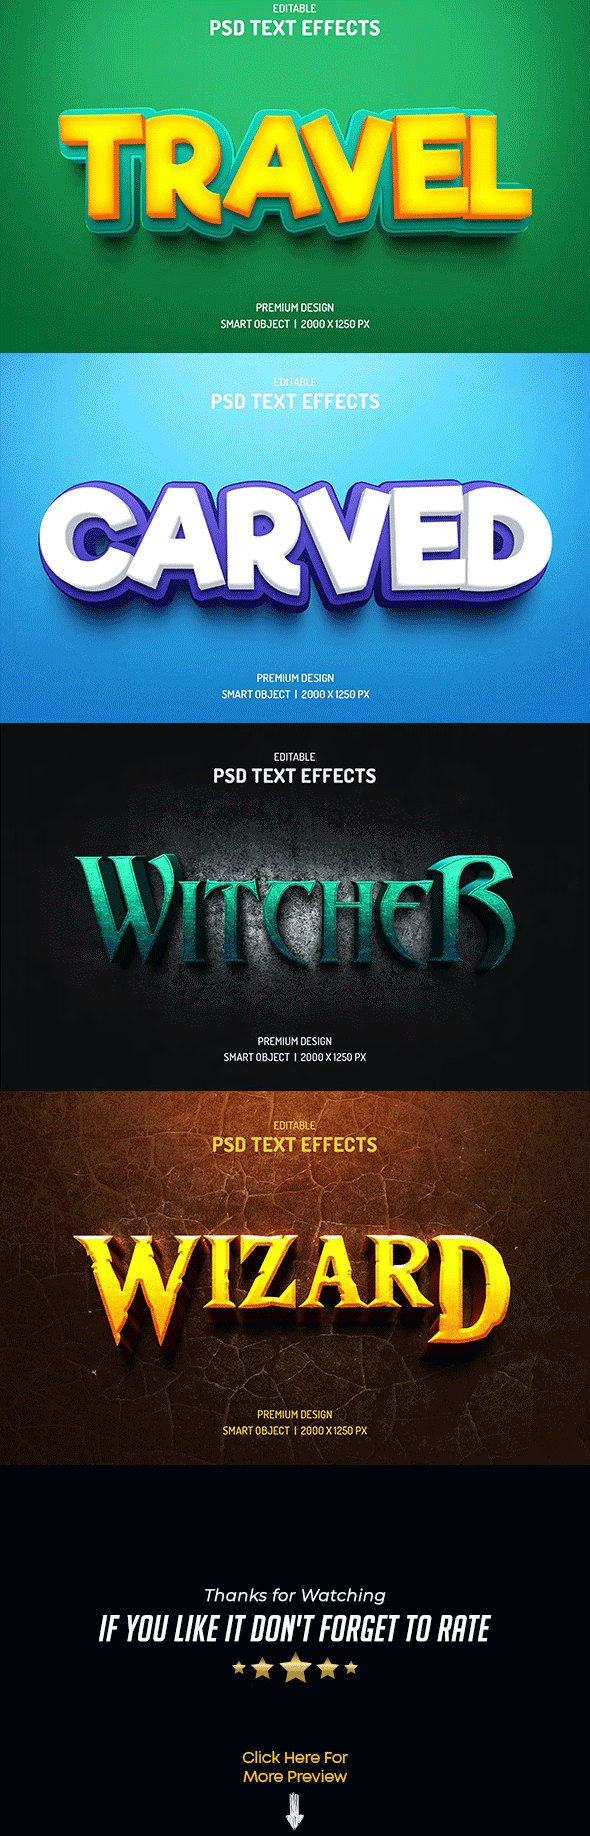 3D Photoshop Text Effects Pack